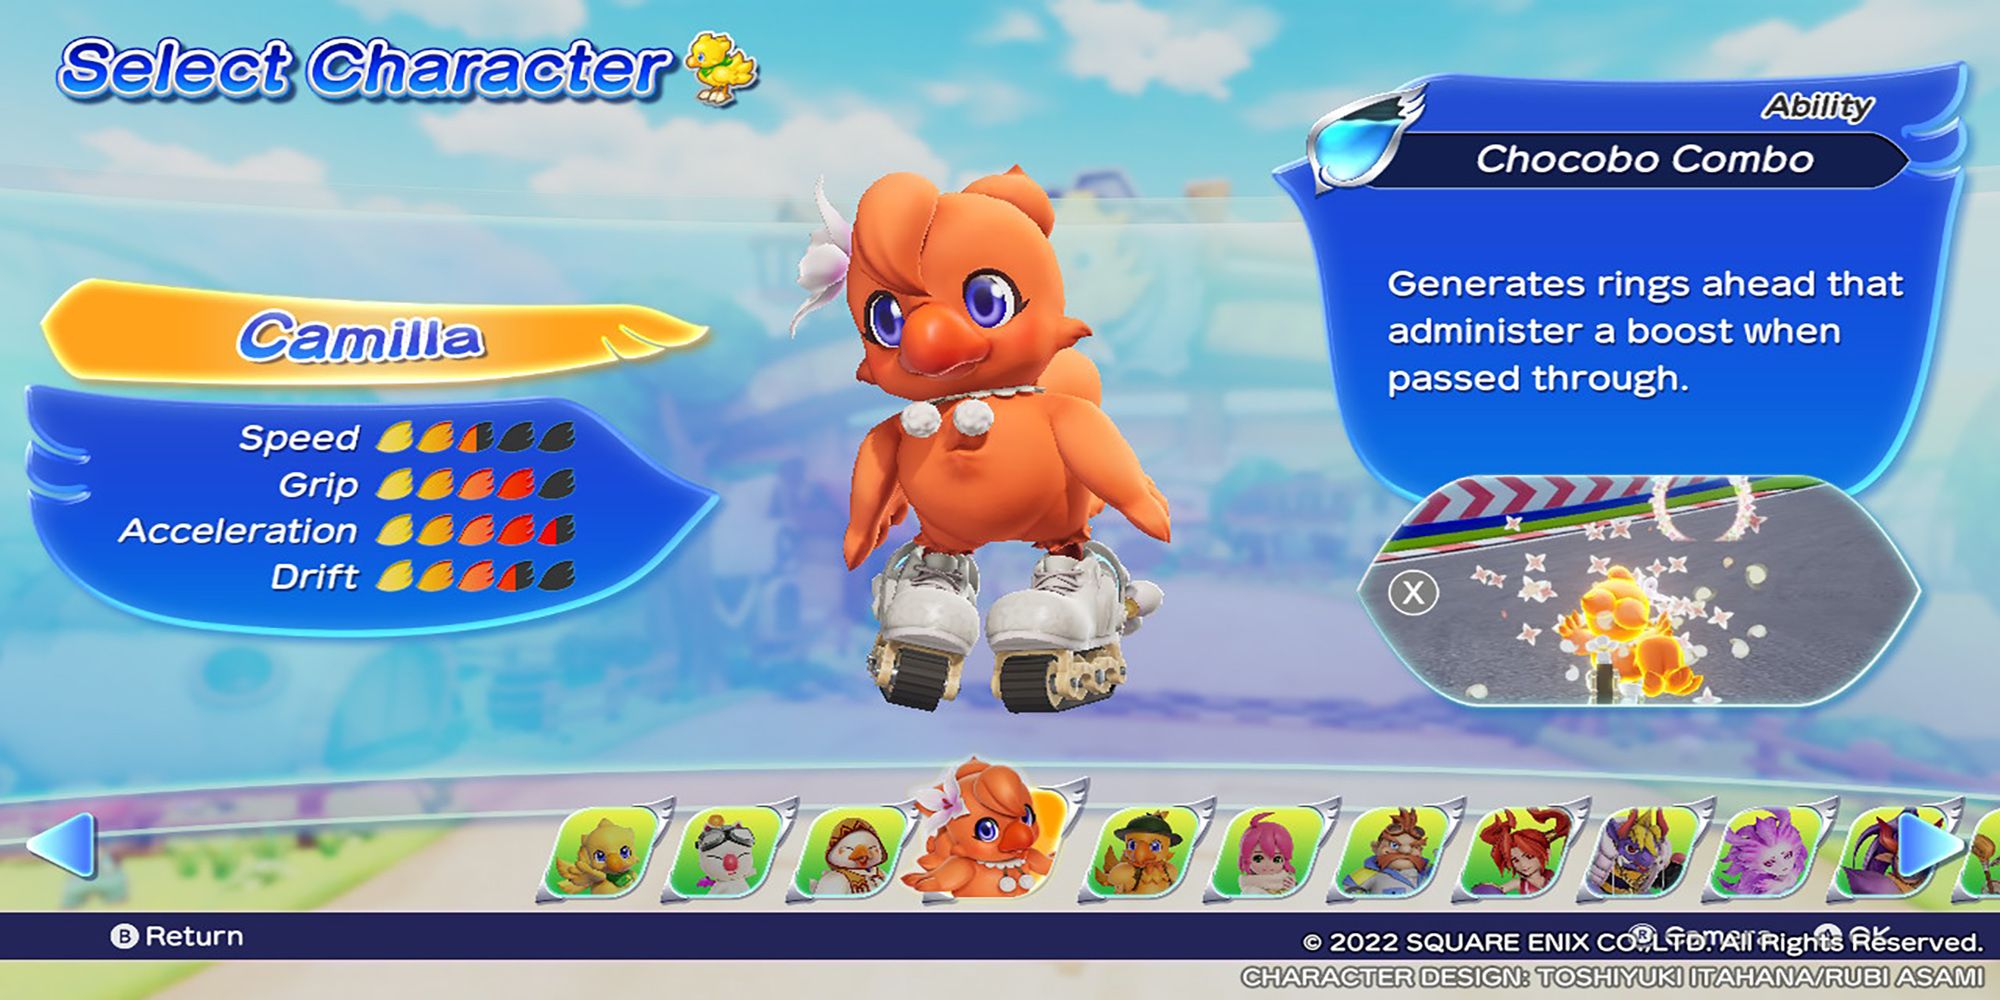 Camila's character model, along with her stats and abilities, in the Select Character menu. Chocobo GP.